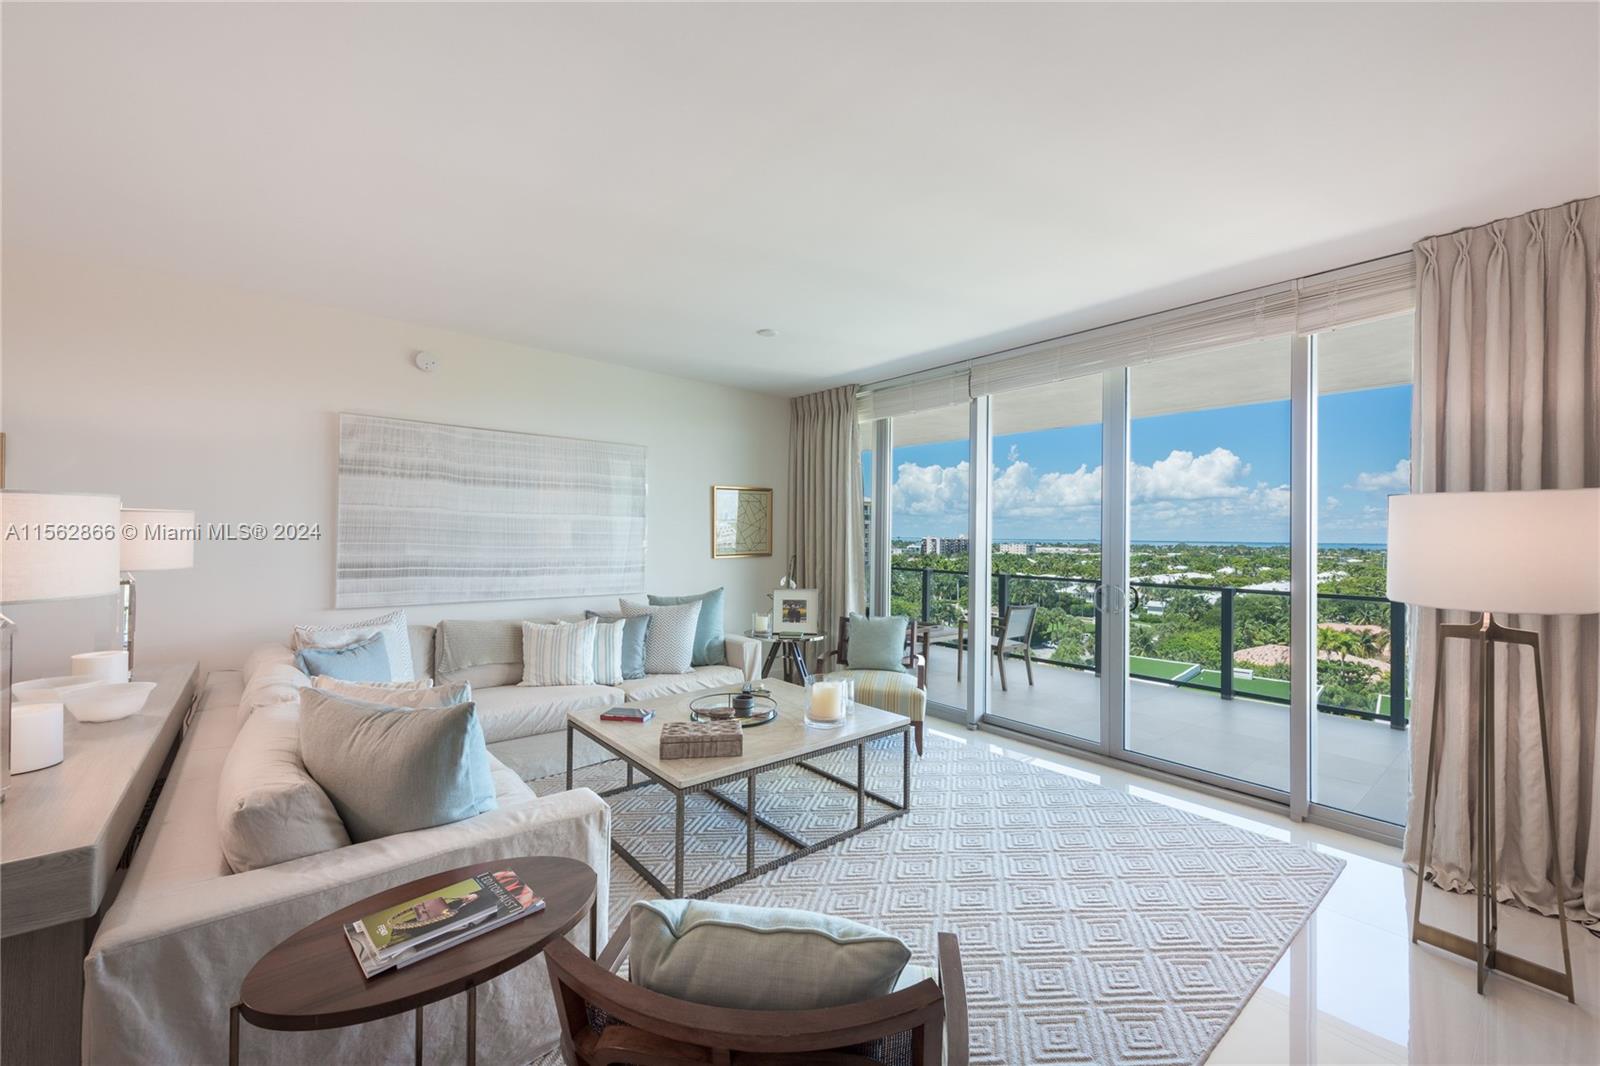 NO ANNUAL LEASES - MIN 2 MONTHS! Fully furnished with exquisite taste! 2 bedrooms + ENCLOSED DEN + 2.5 bathrooms. Amazing views to the island of Key Biscayne. Enjoy the most exclusive building in Key Biscayne and its amenities which include gym, spa, pool, restaurant on site and beach access. AVAILABLE STARTING JUNE 3rd, 2024! UNIT IS NOT AVAILABLE FOR THE WINTER SEASON (its already rented for the period of December 27th 2024 - April 30th 2025).